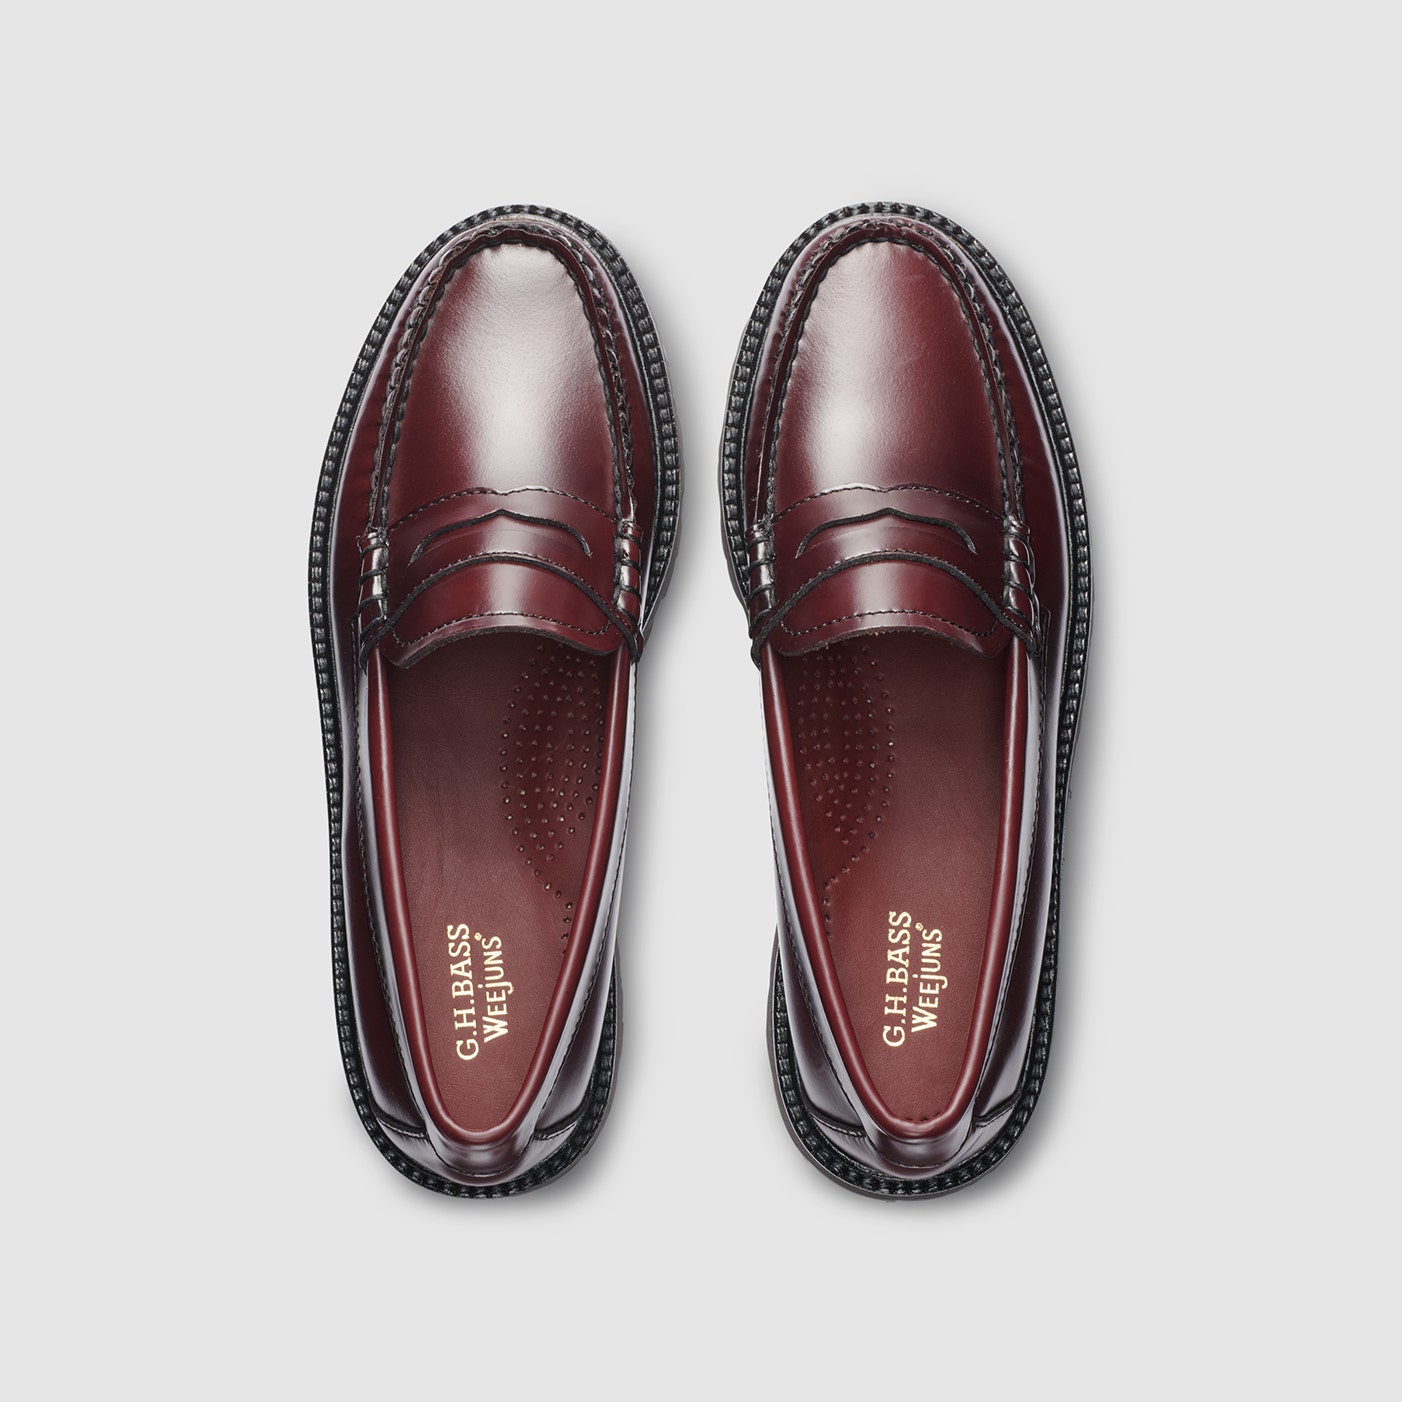 G.H Bass Whitney Super Lug Weejuns Loafer in Wine BAX1W010 | Shop from eightywingold an official brand partner for G.H. Bass in Canada and US.